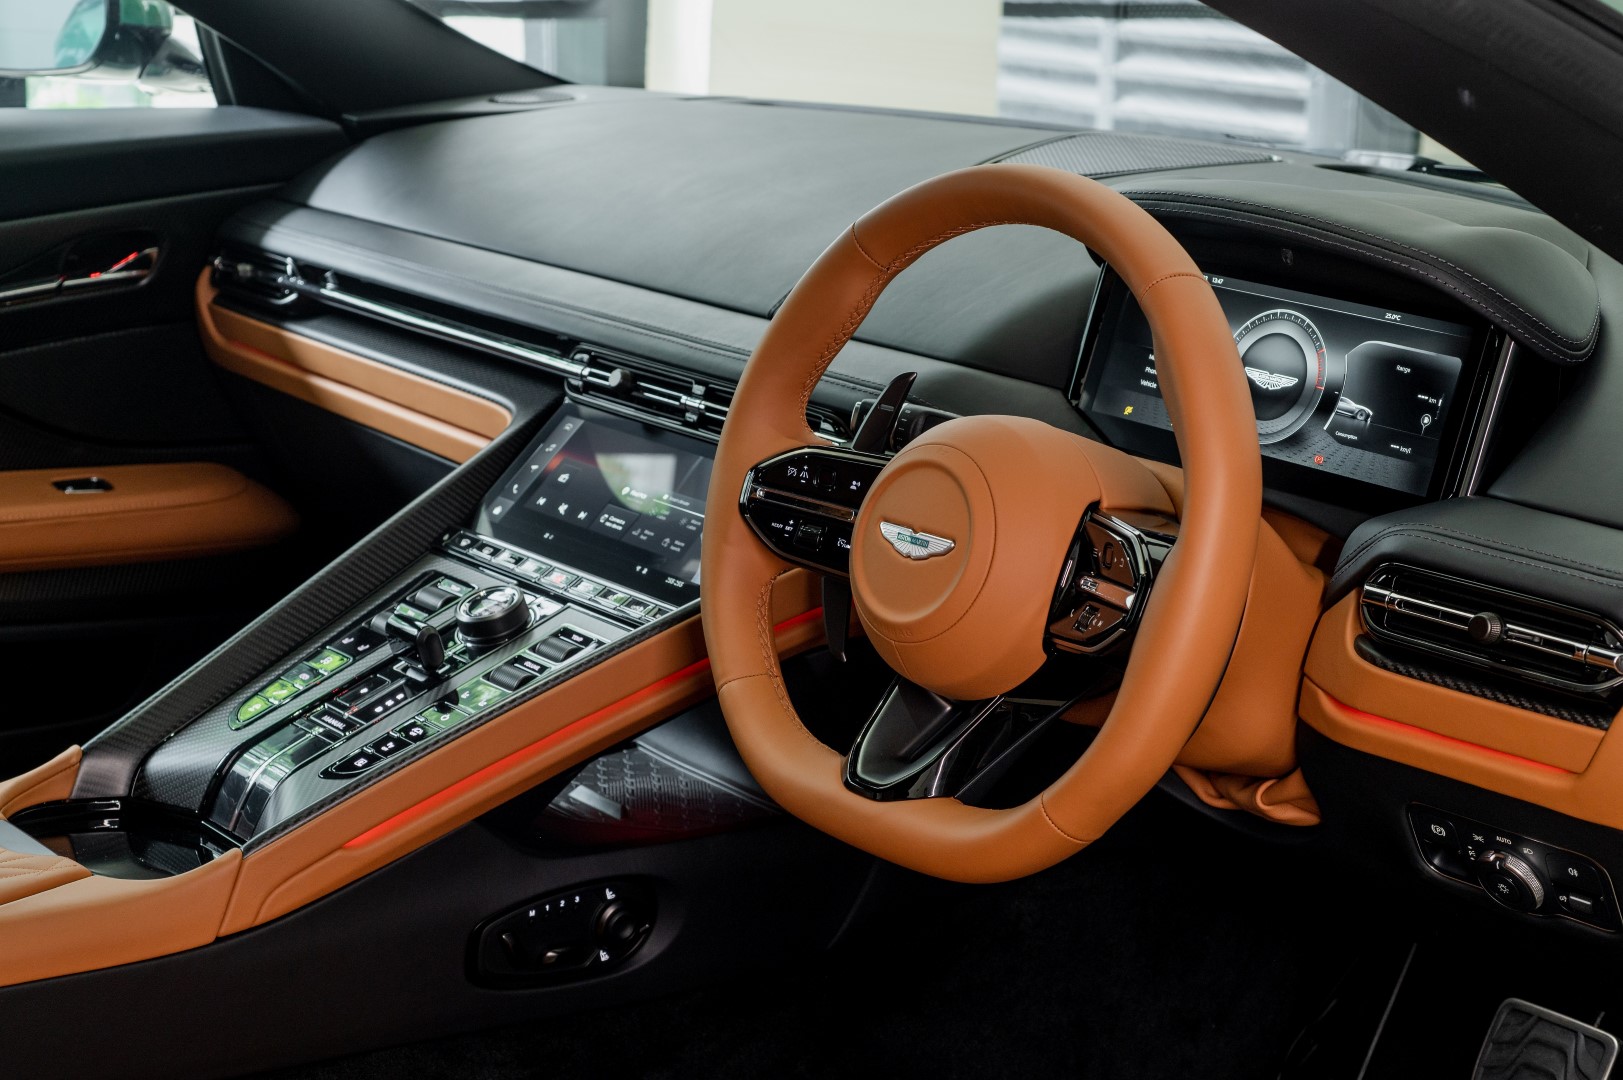 Aston Martin DB12 is now in Malaysia – RM1.08 million